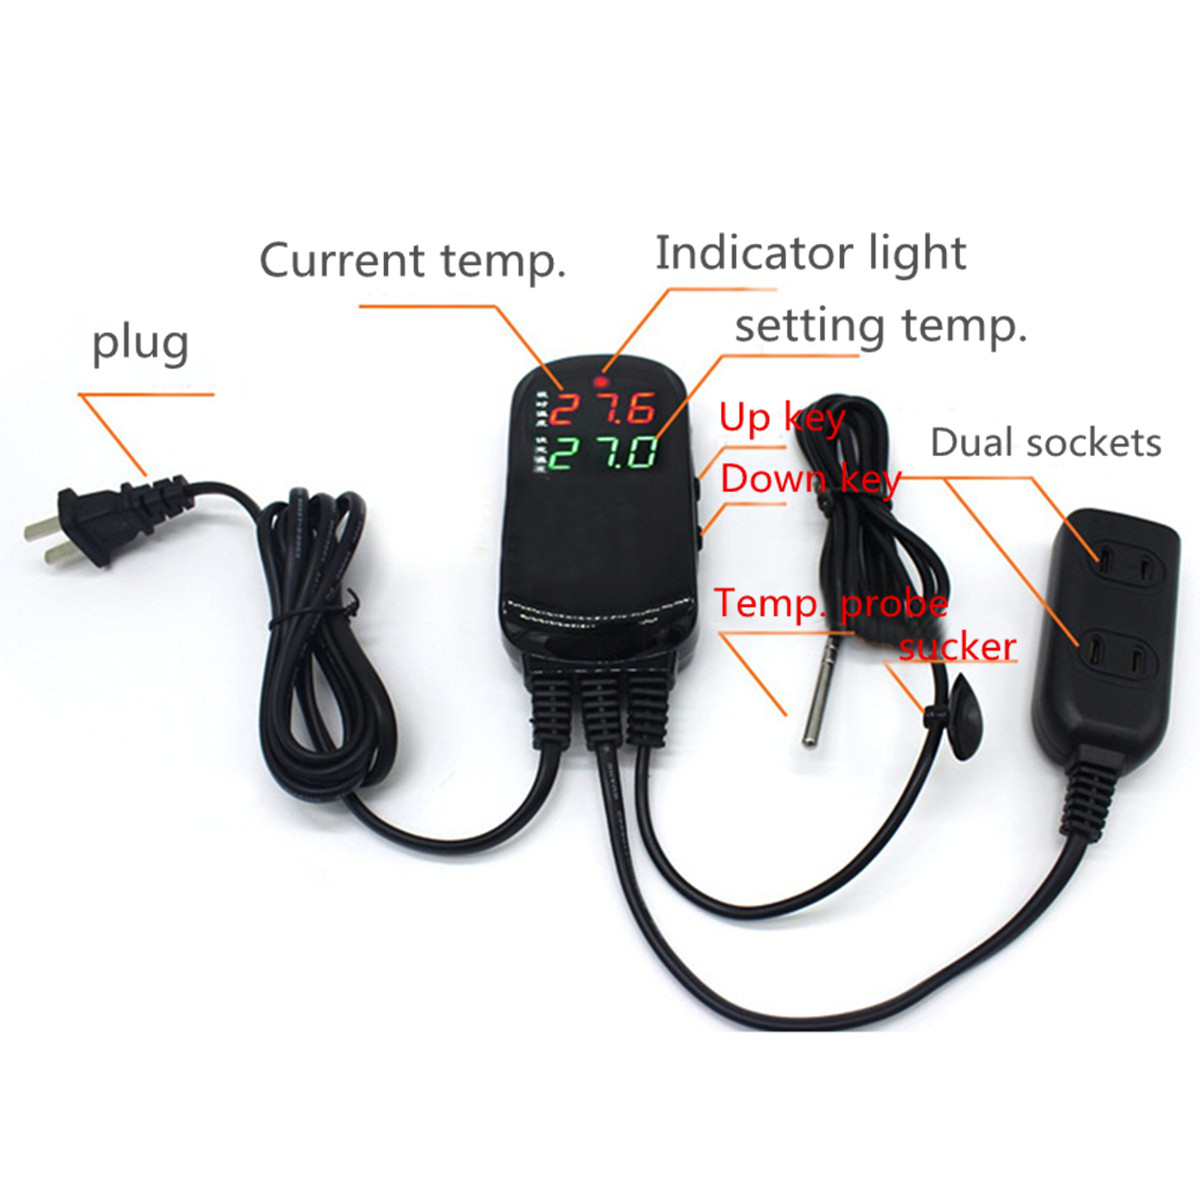 Electronic-Thermostat-LED-Digital-Temperature-Controller-Thermocouple-Thermal-Regulator-with-Socket-1255386-8